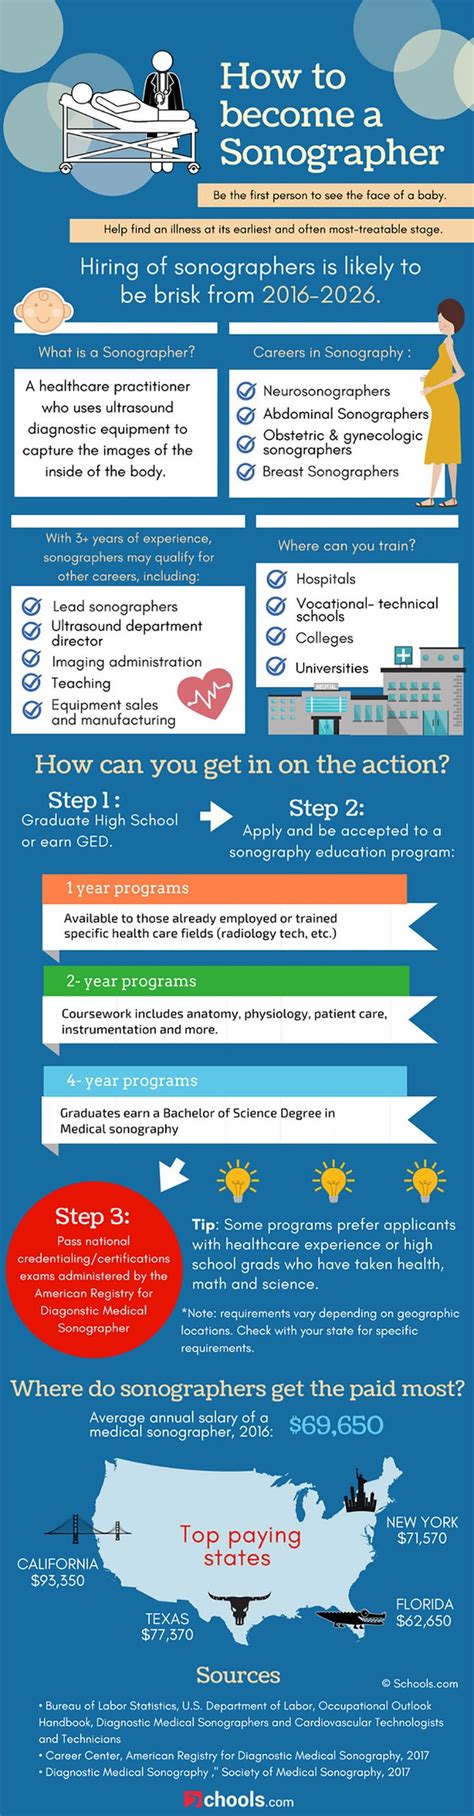 Career Options How To Become A Sonographer Infographic Educational